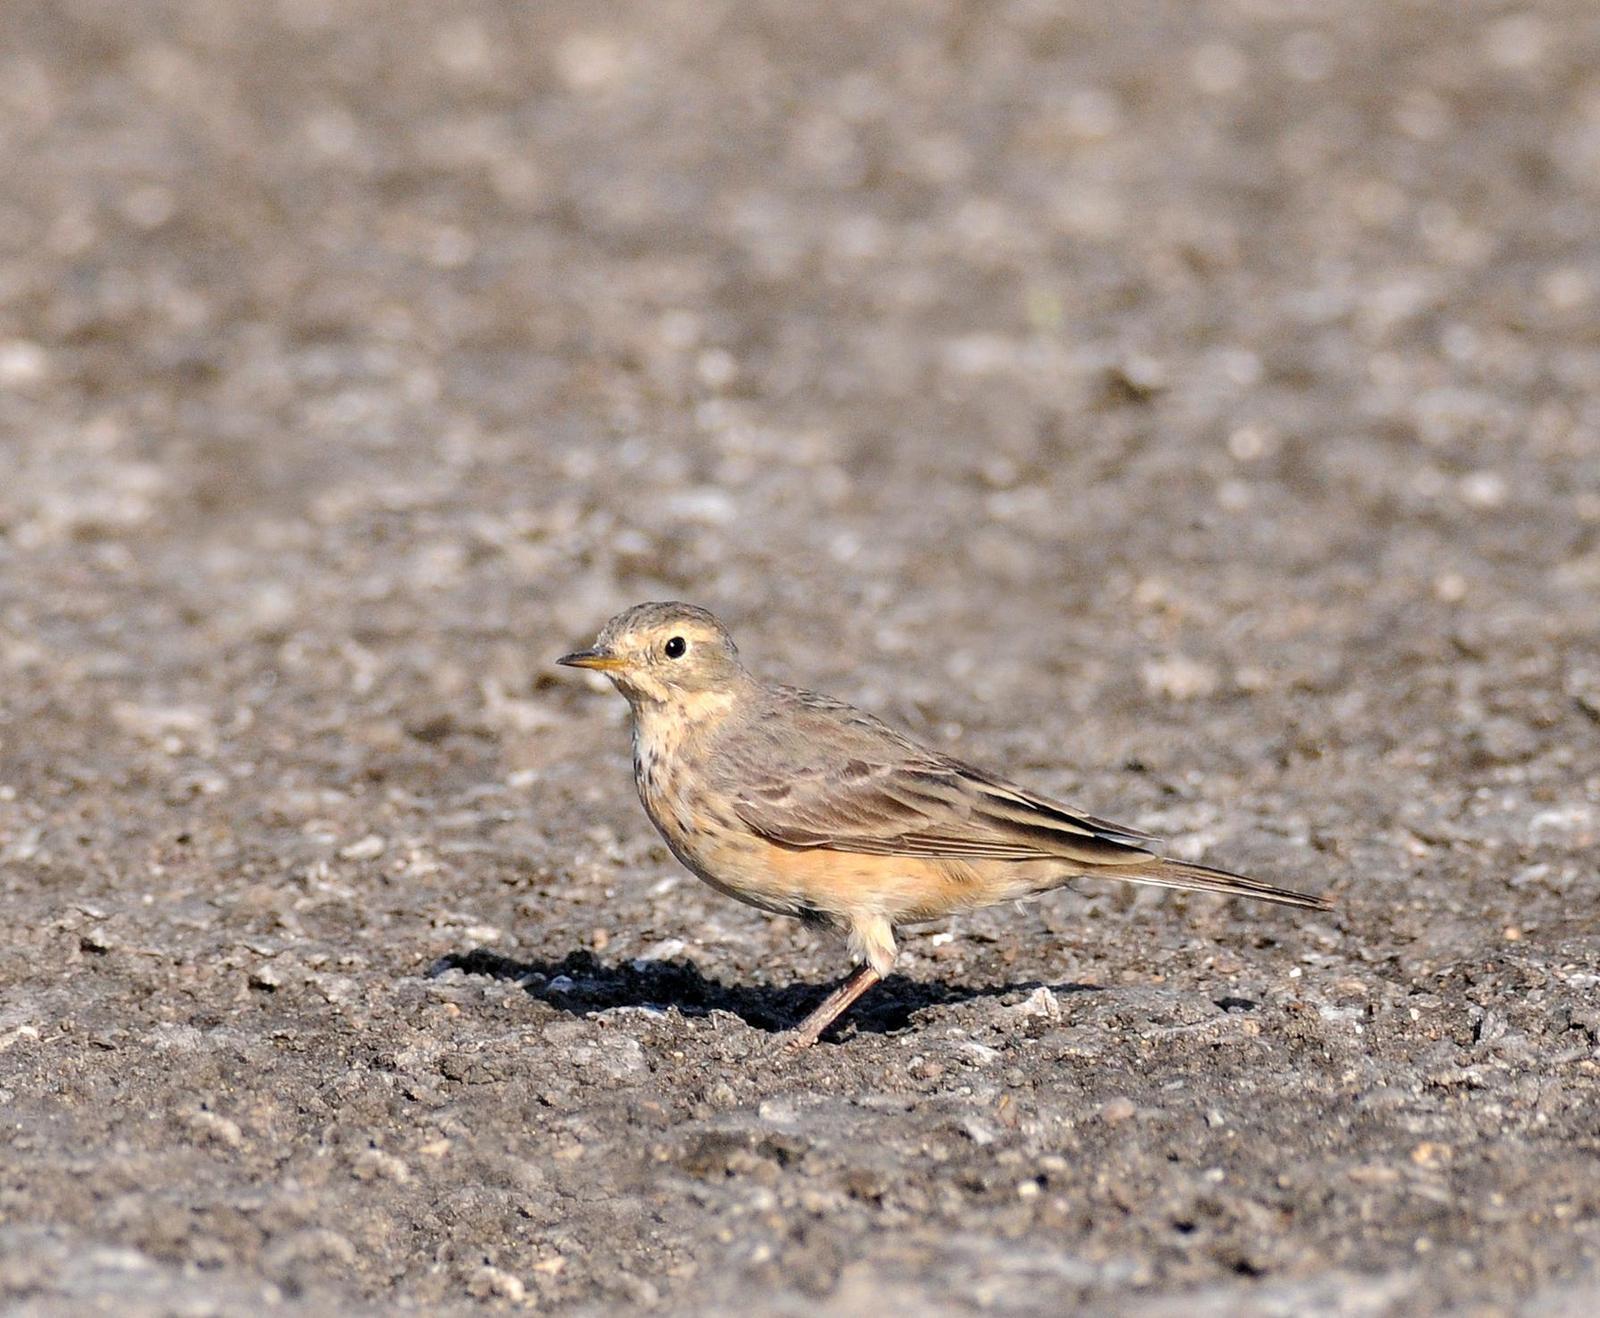 American Pipit Photo by Steven Mlodinow